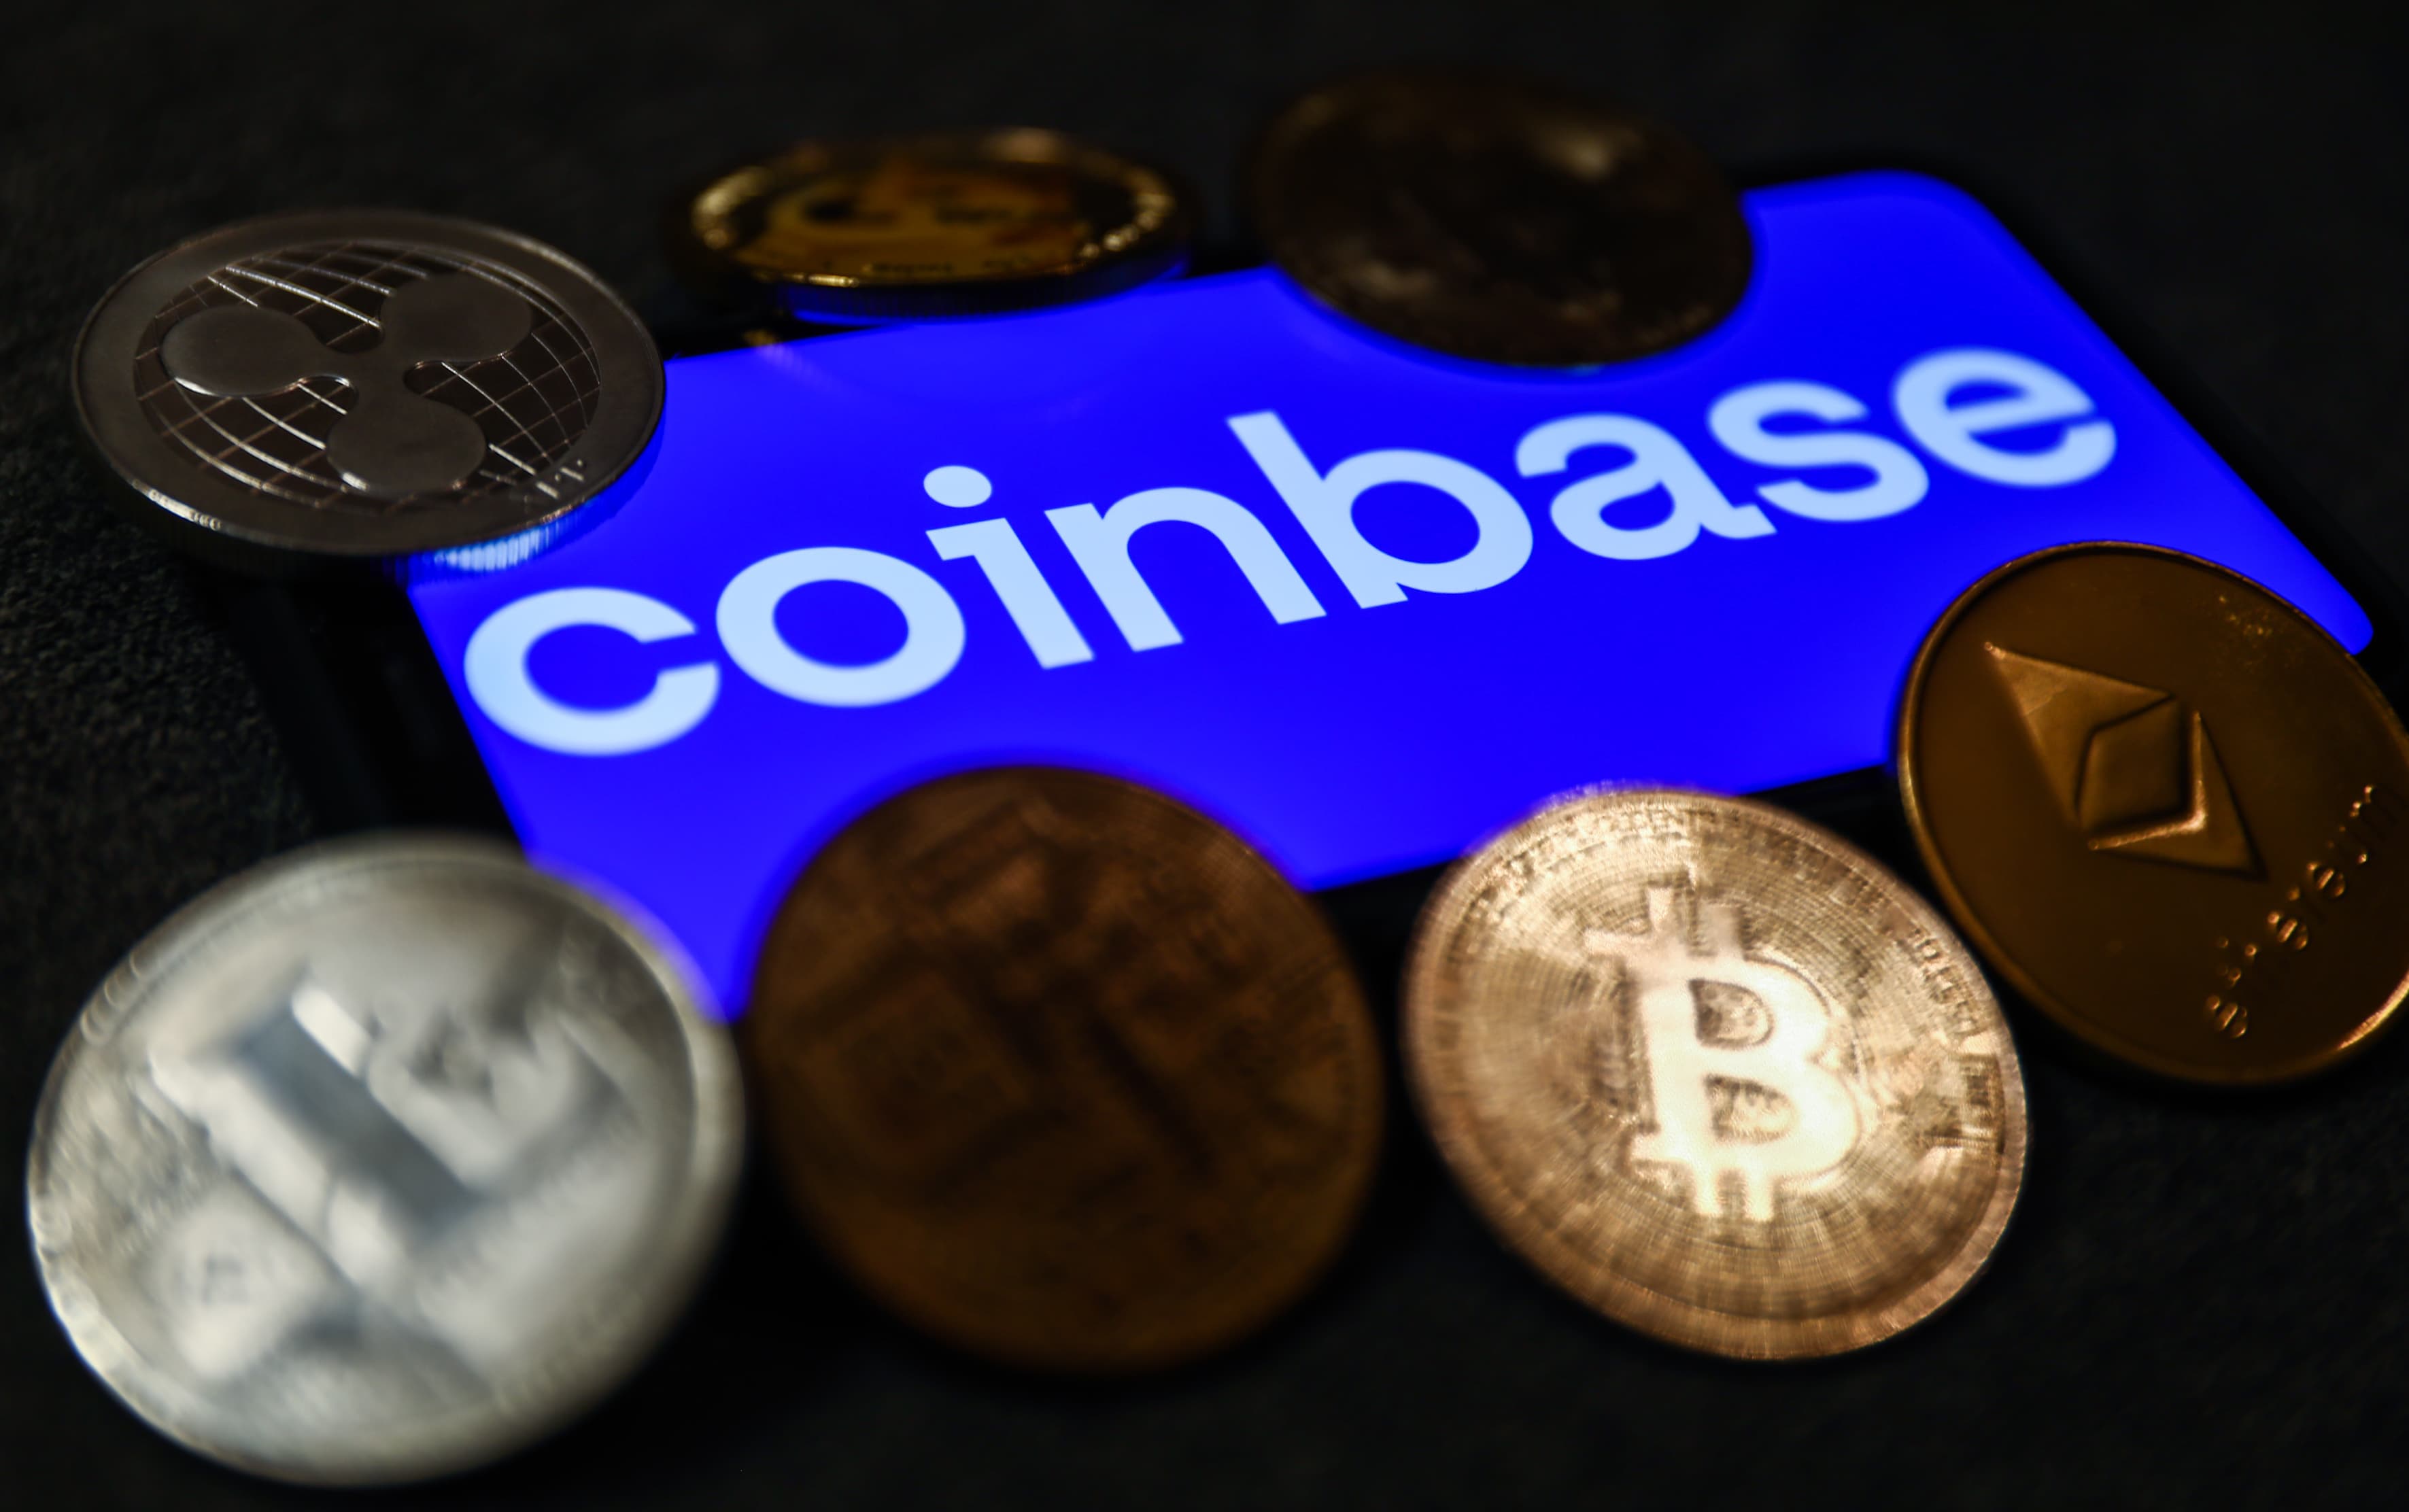 According to Bank of America, Coinbase stock is likely to fall 40% even if Bitcoin ETFs are approved